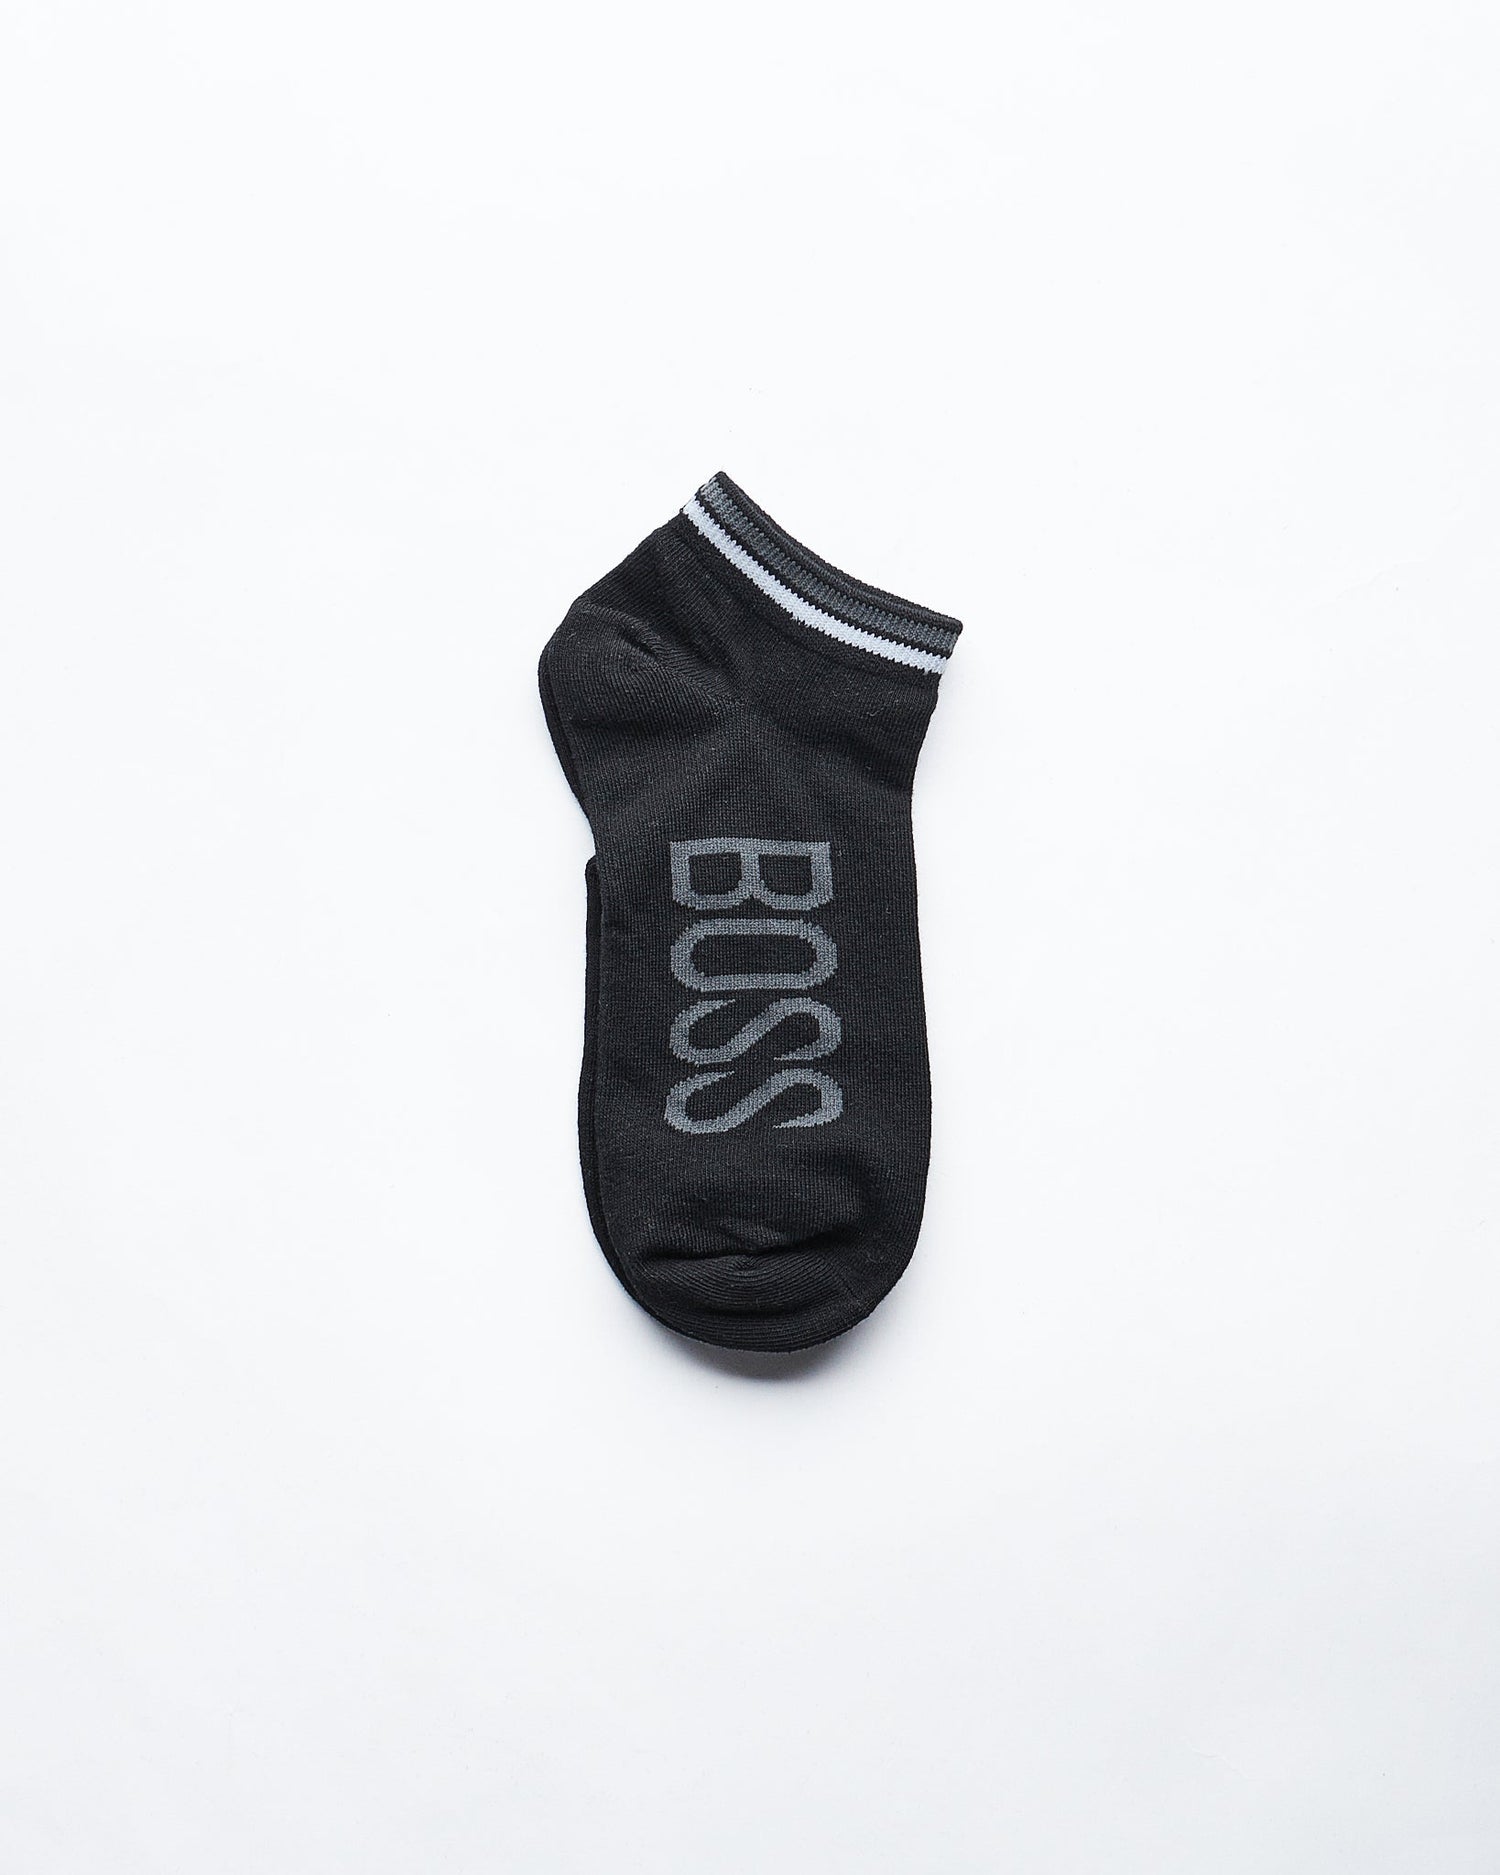 MOI OUTFIT-Boss 5 Pairs Low Cut Socks 14.50